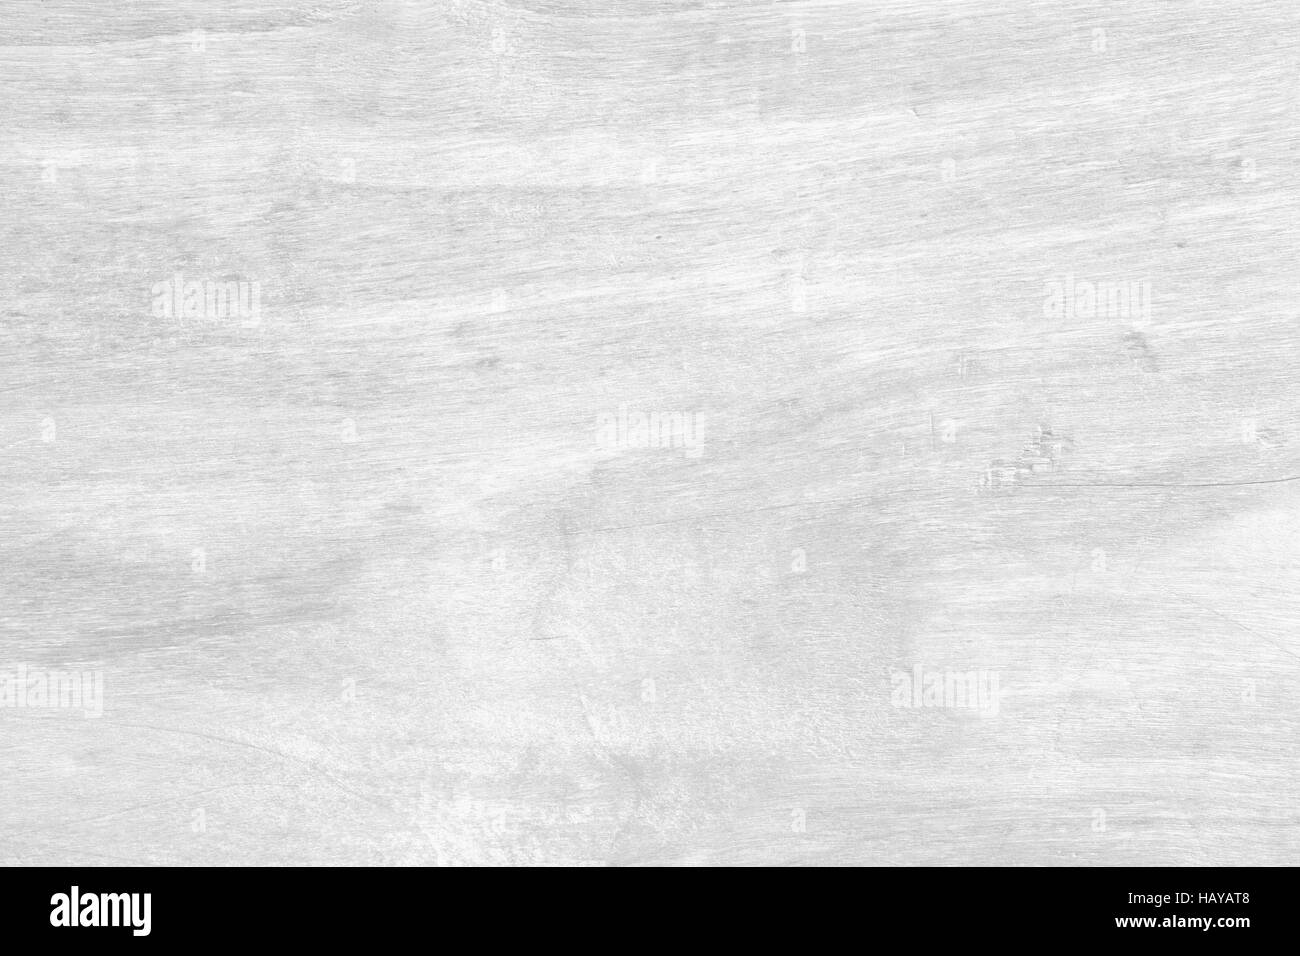 mahogany wooden texture or wood grain pattern background Stock Photo